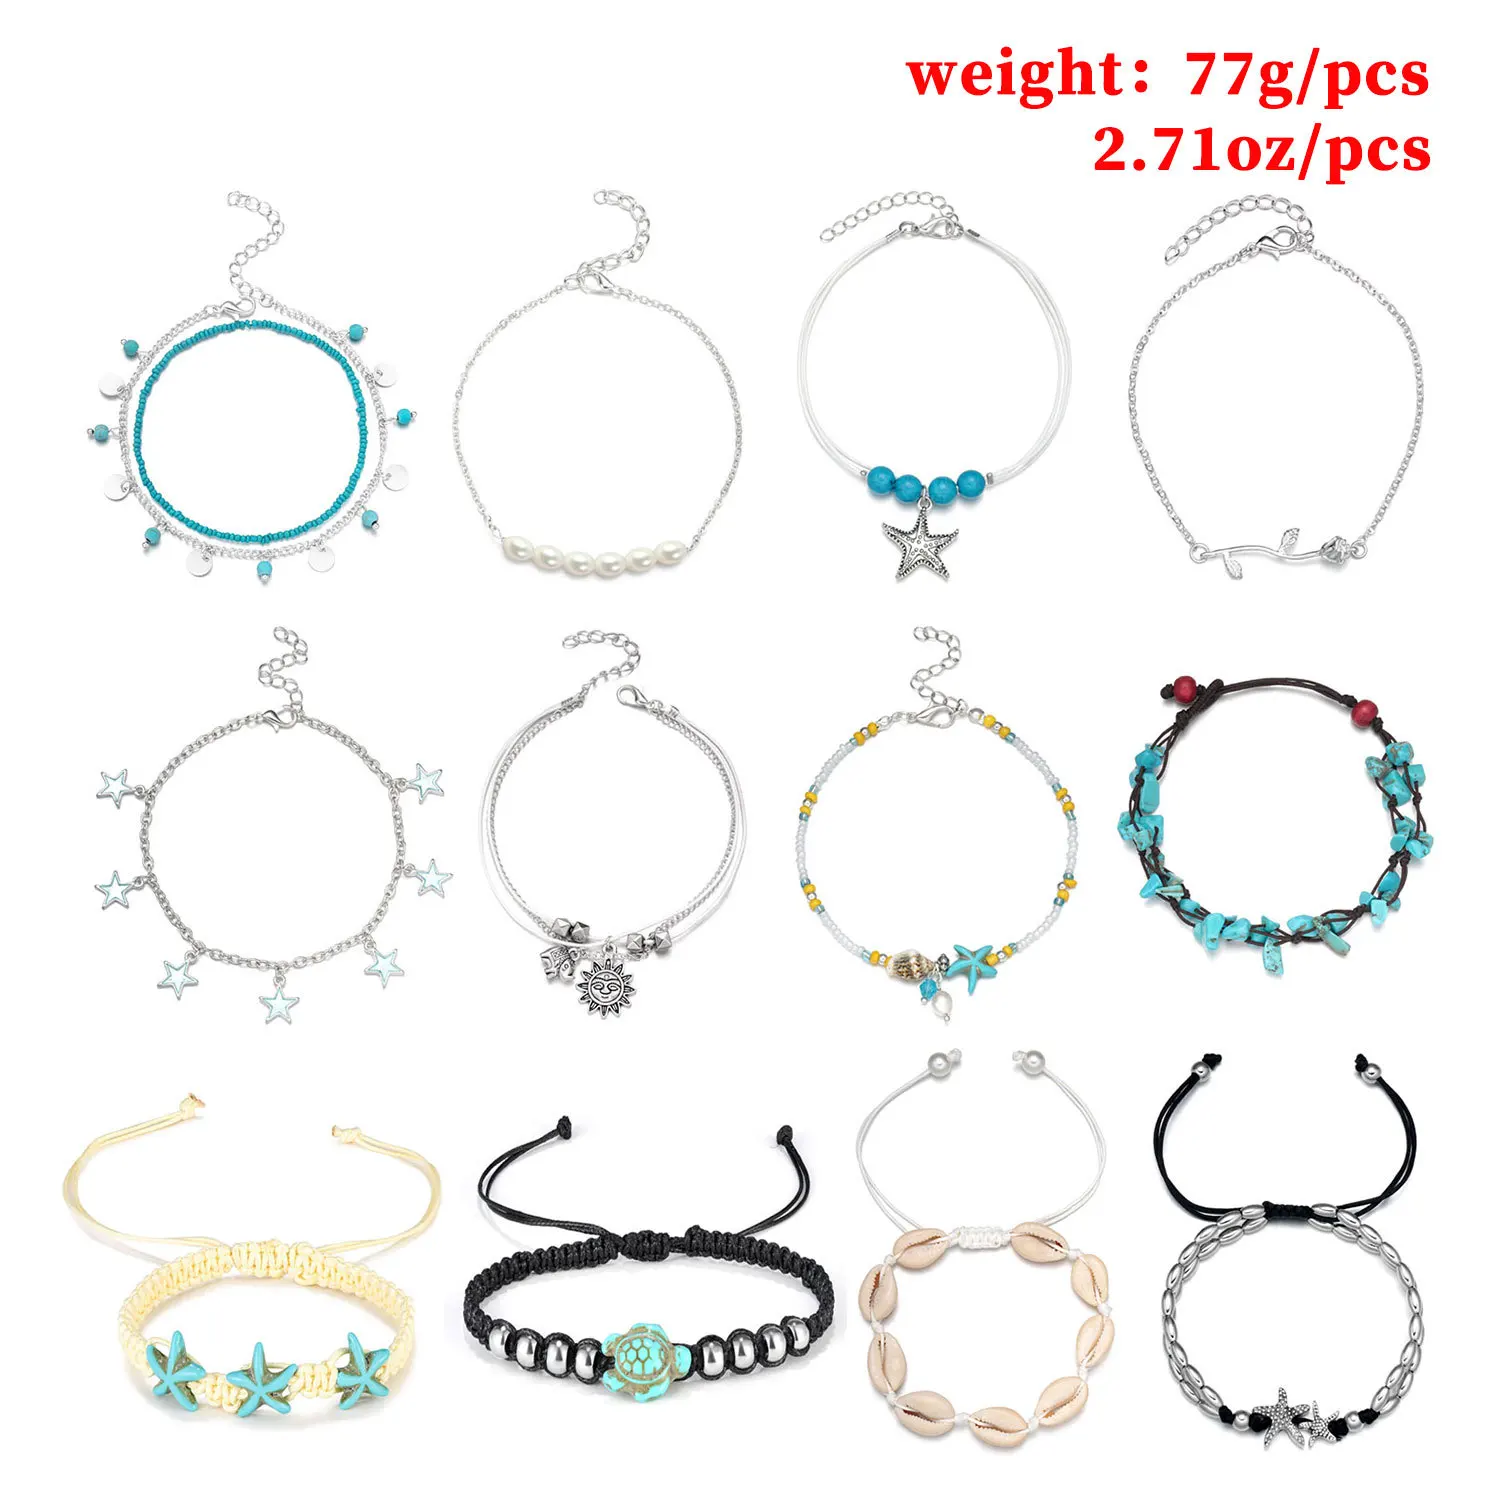 

16PCS Adjustable Beach Foot Chain Anklet Bracelet Ankle Chains Foot for Women Girls